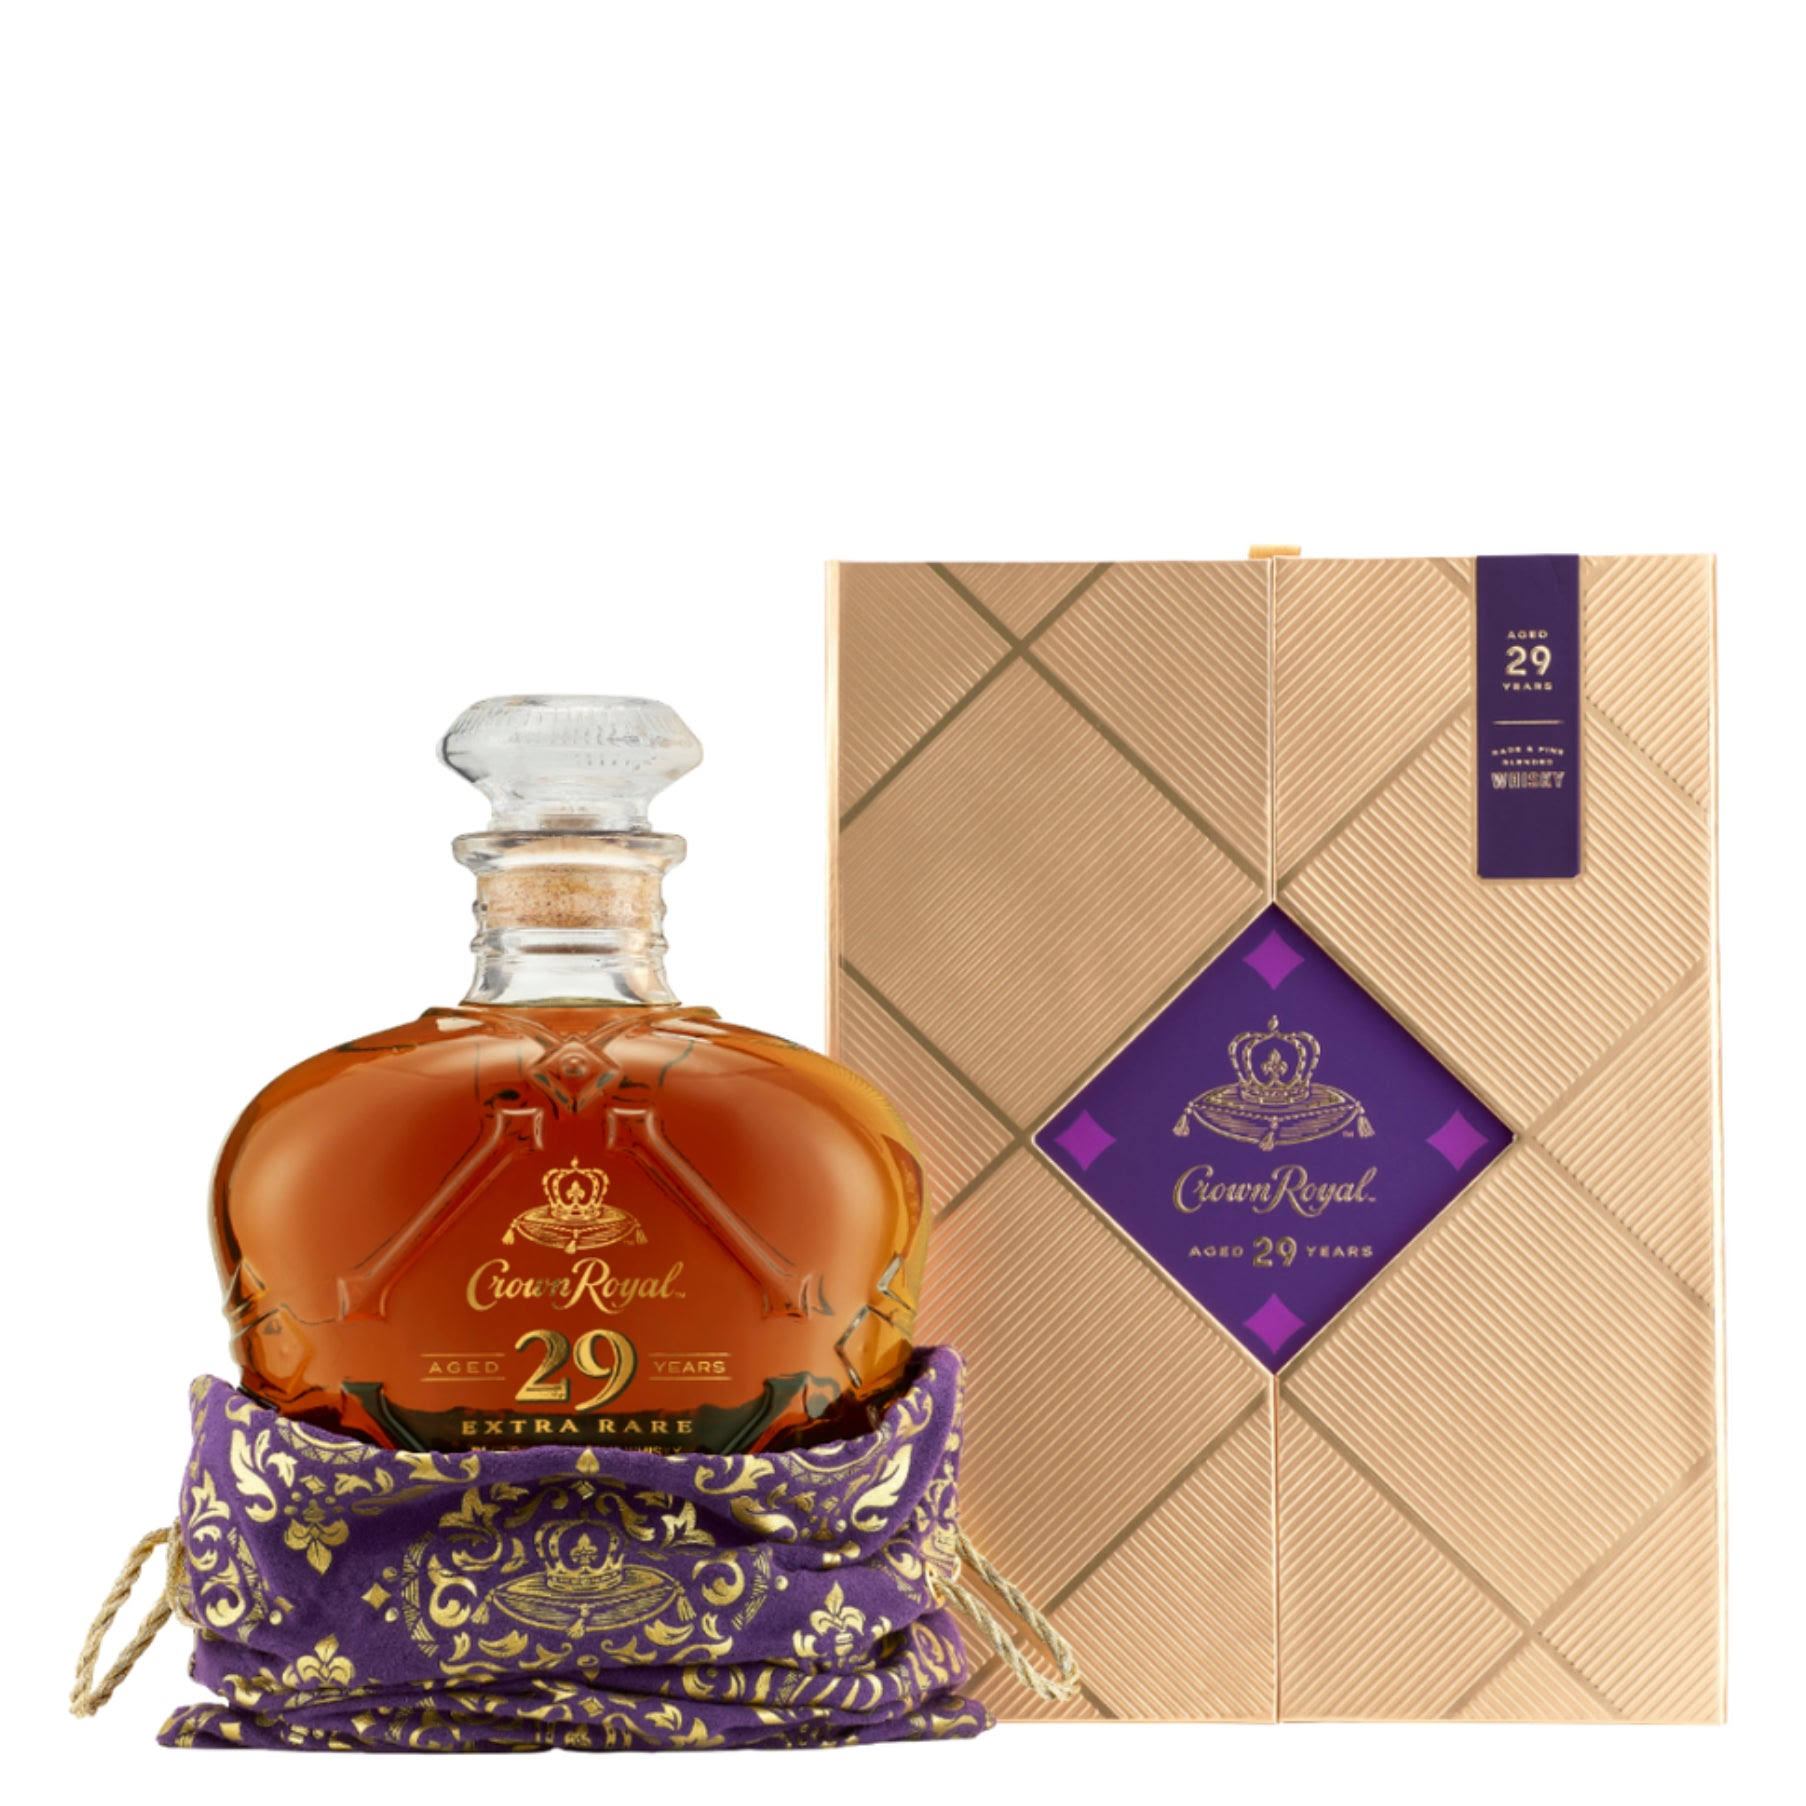 Crown Royal Extra Rare 29 Year Old Canadian Whisky 750ml